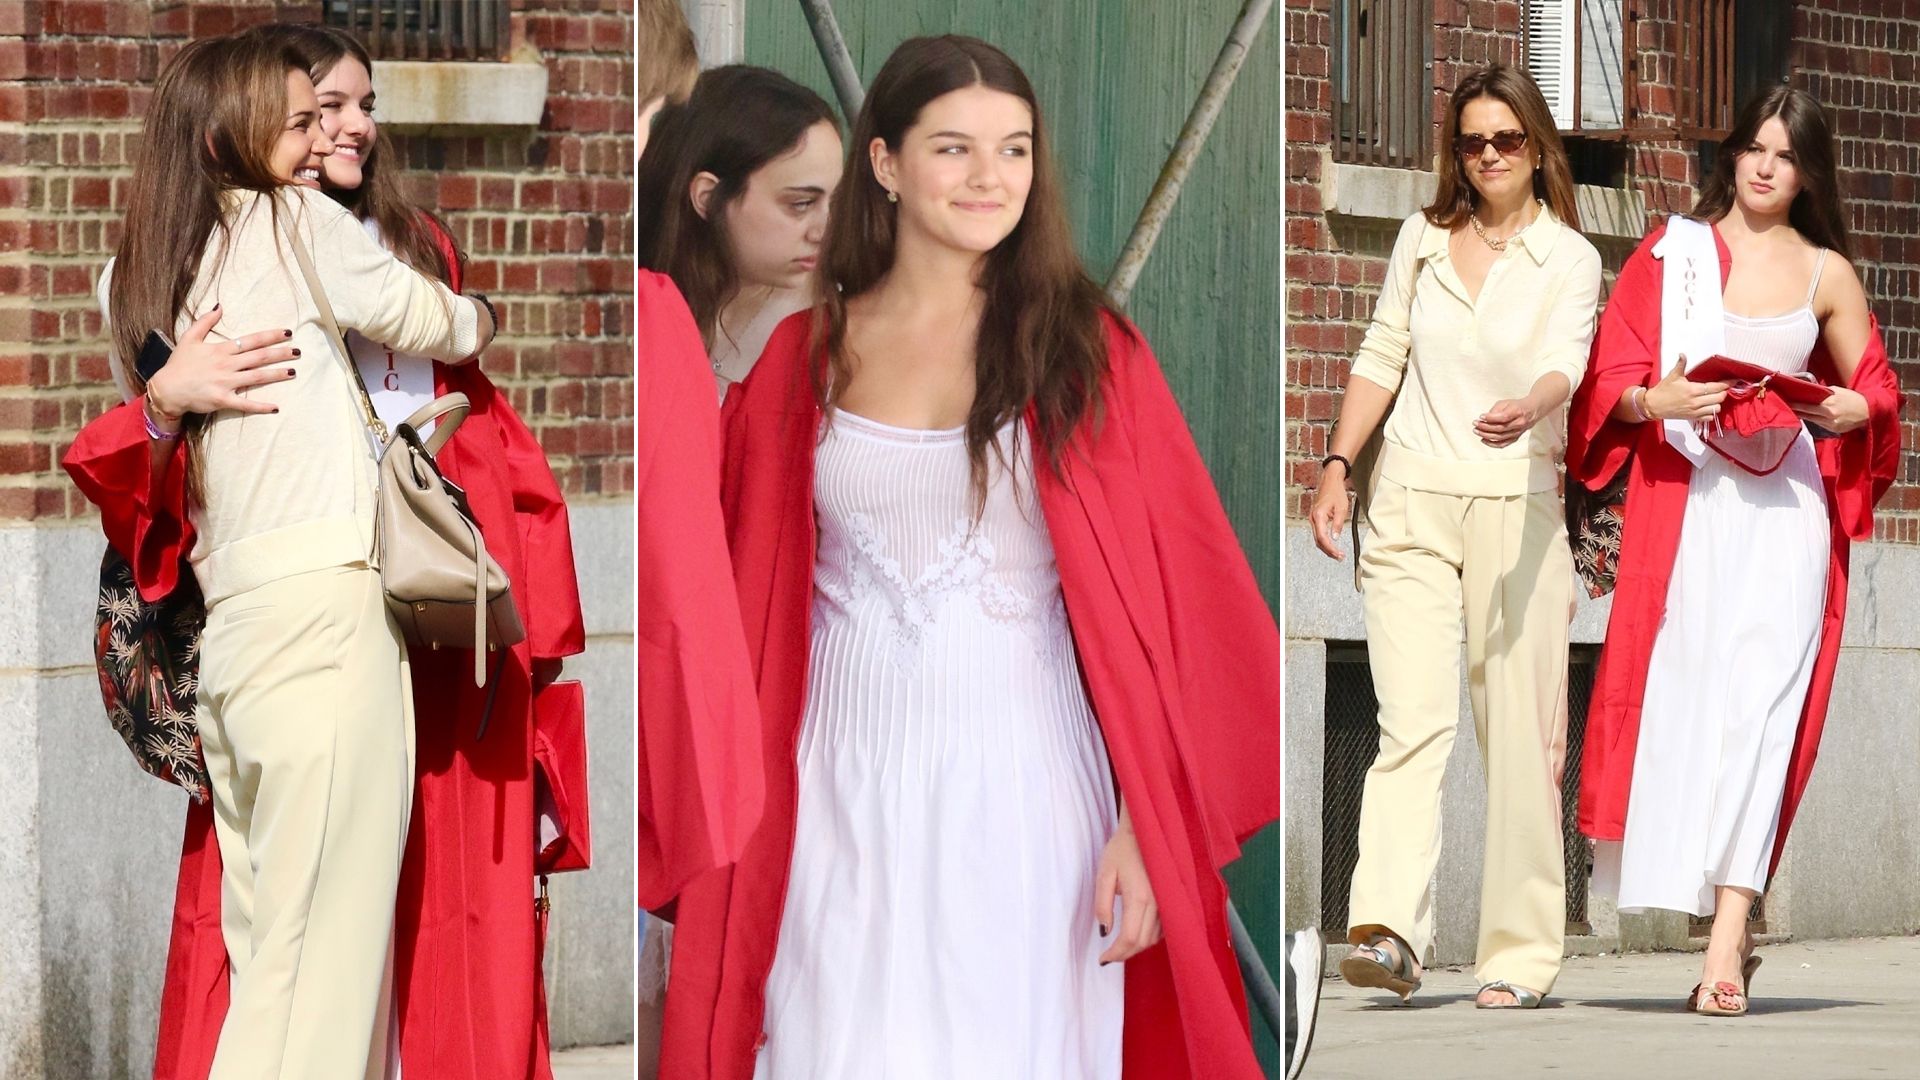 Katie Holmes beams with pride as daughter Suri Cruise drops her estranged father Tom's last name at graduation